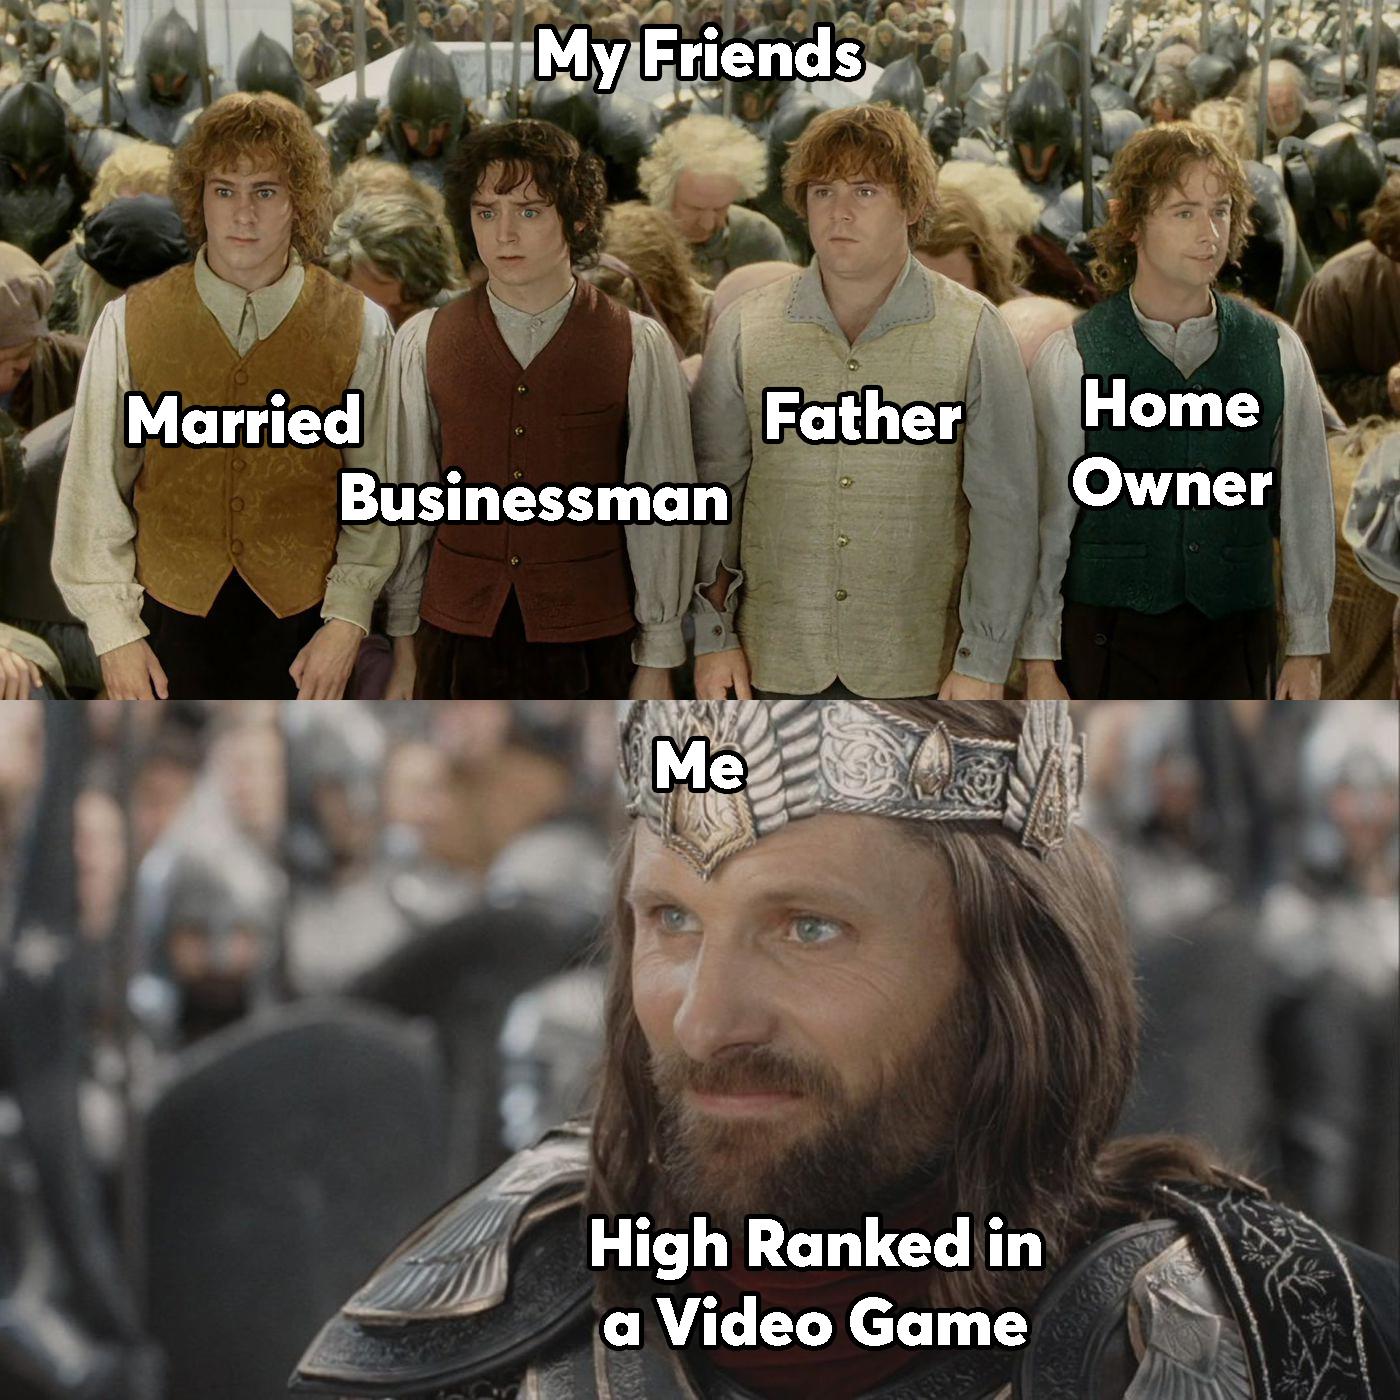 gaming dank memes - lord of the rings hobbits - Married My Friends Father Businessman Me High Ranked in a Video Game Home Owner